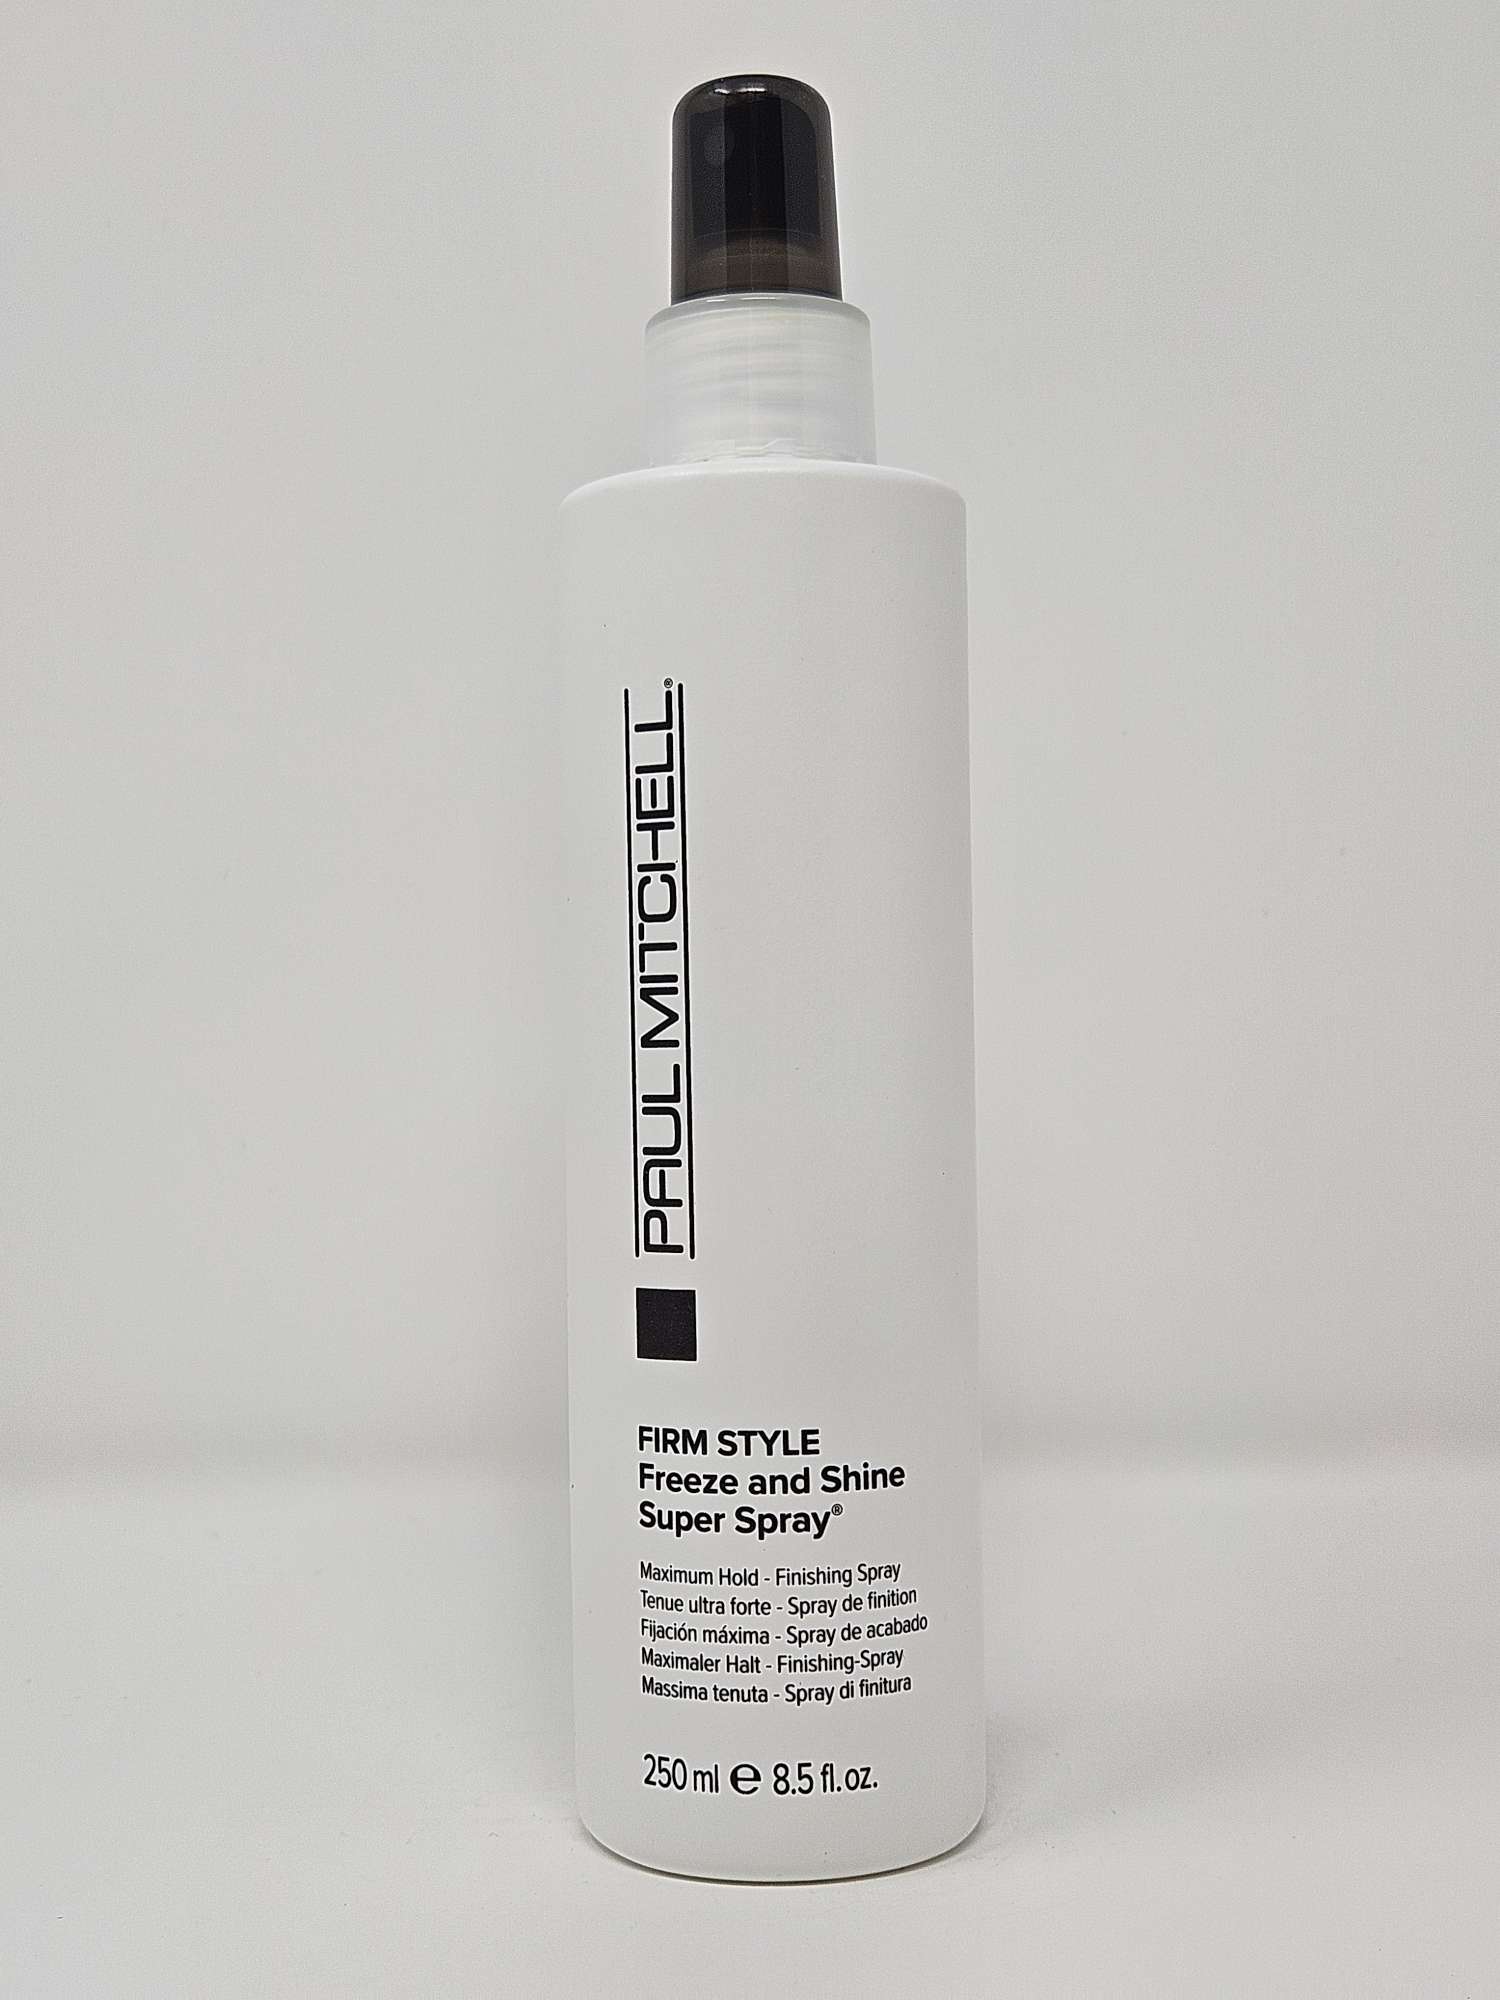 Paul Mitchell Firm Style Freeze and Shine Spray